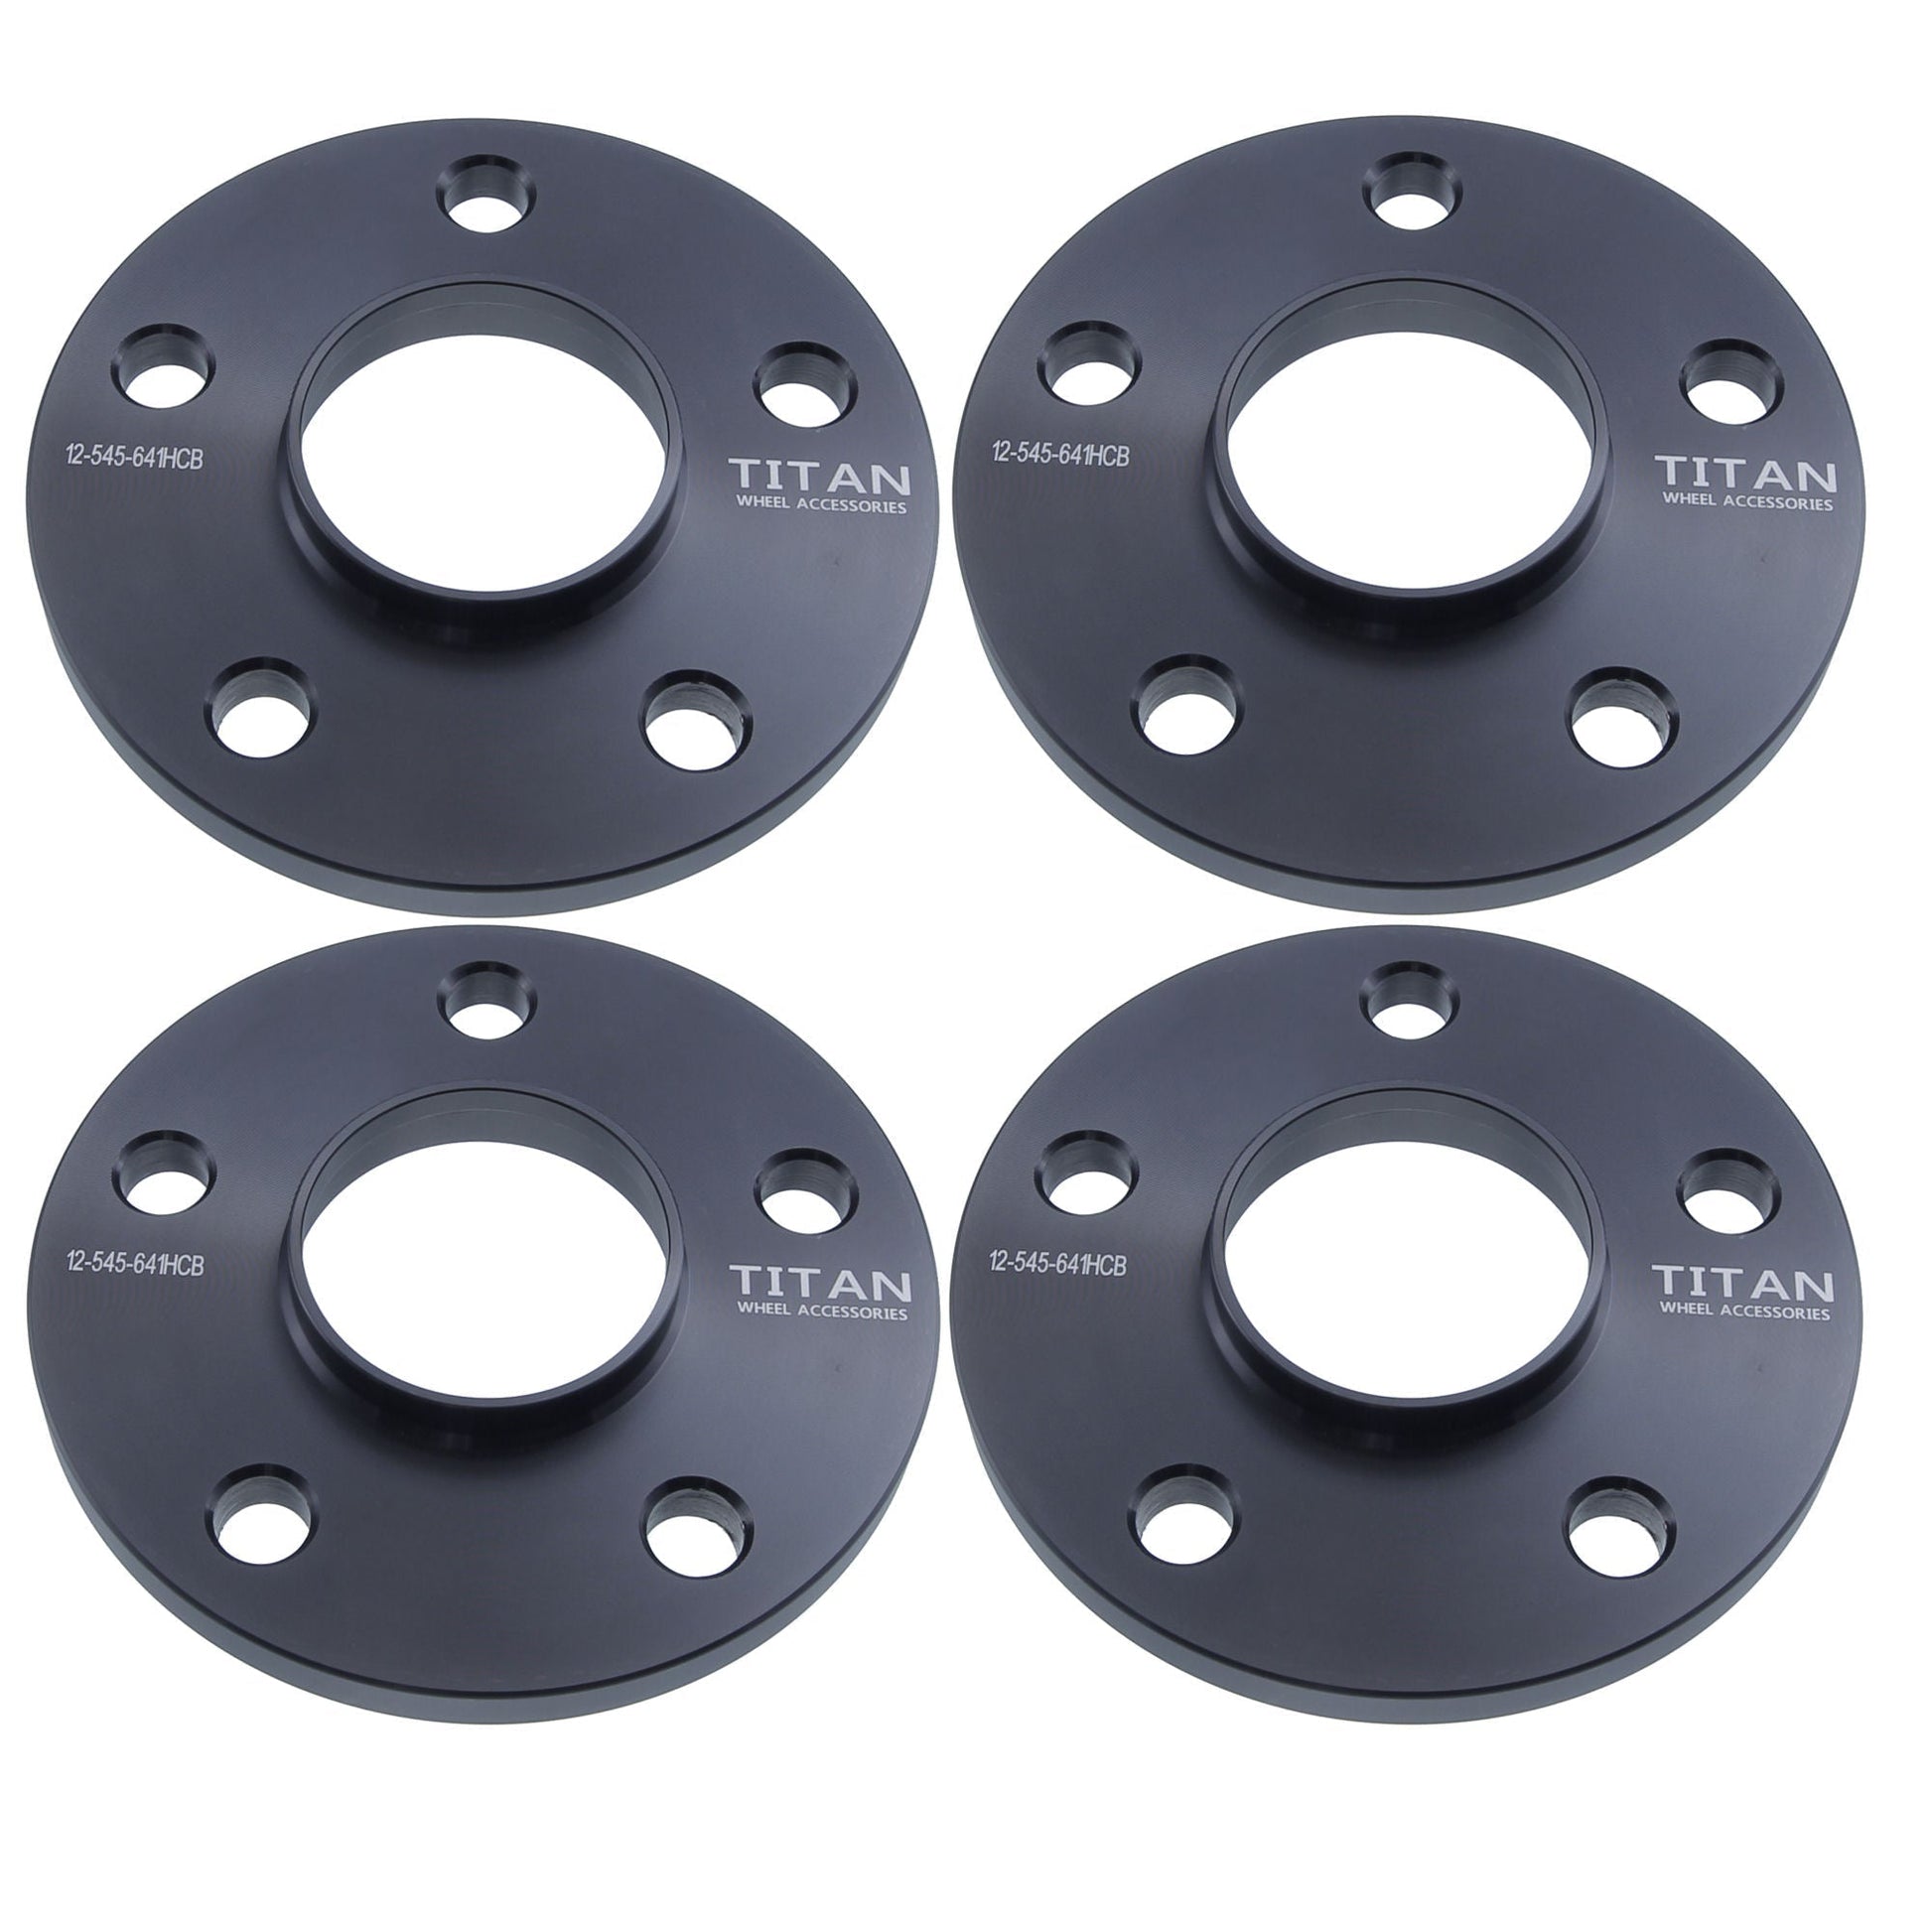 12mm Titan Wheel Spacers for Acura TSX TL Honda Accord Civic | 5x114.3 | 64.1 Hubcentric | Set of 4 | Titan Wheel Accessories